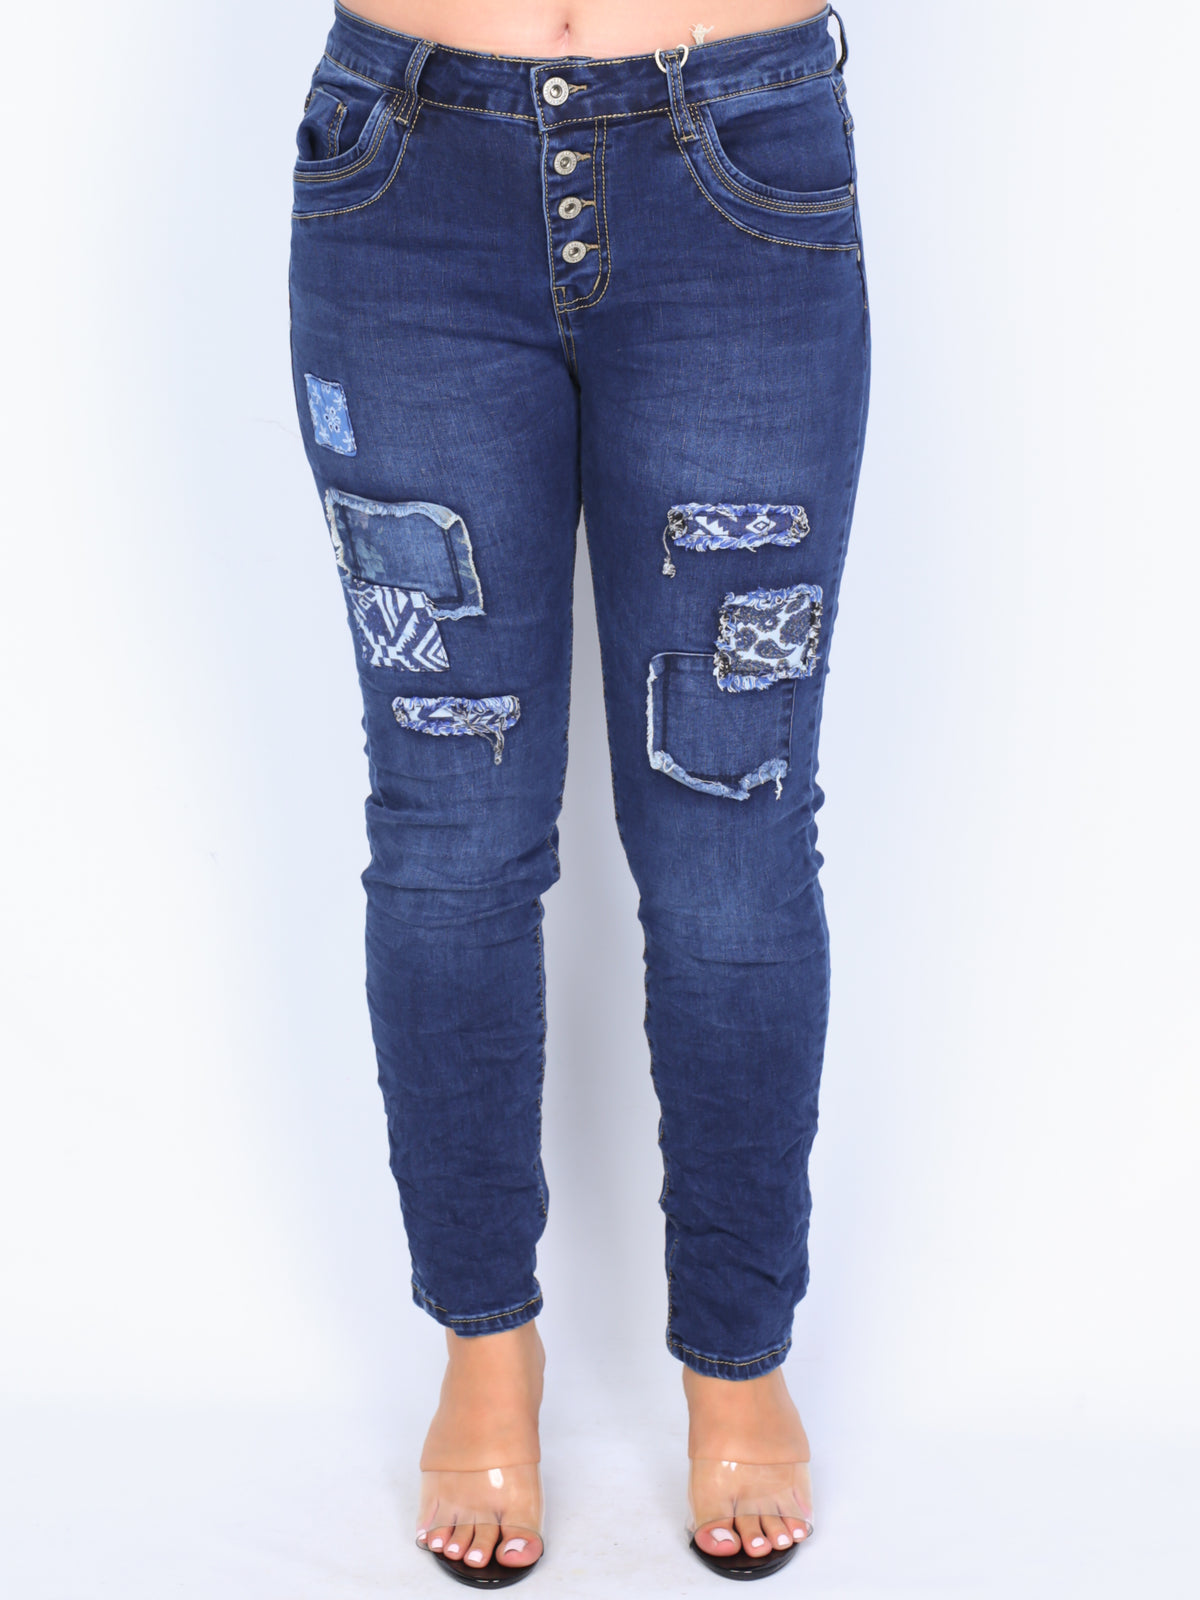 Karostar jeans with 7 patches